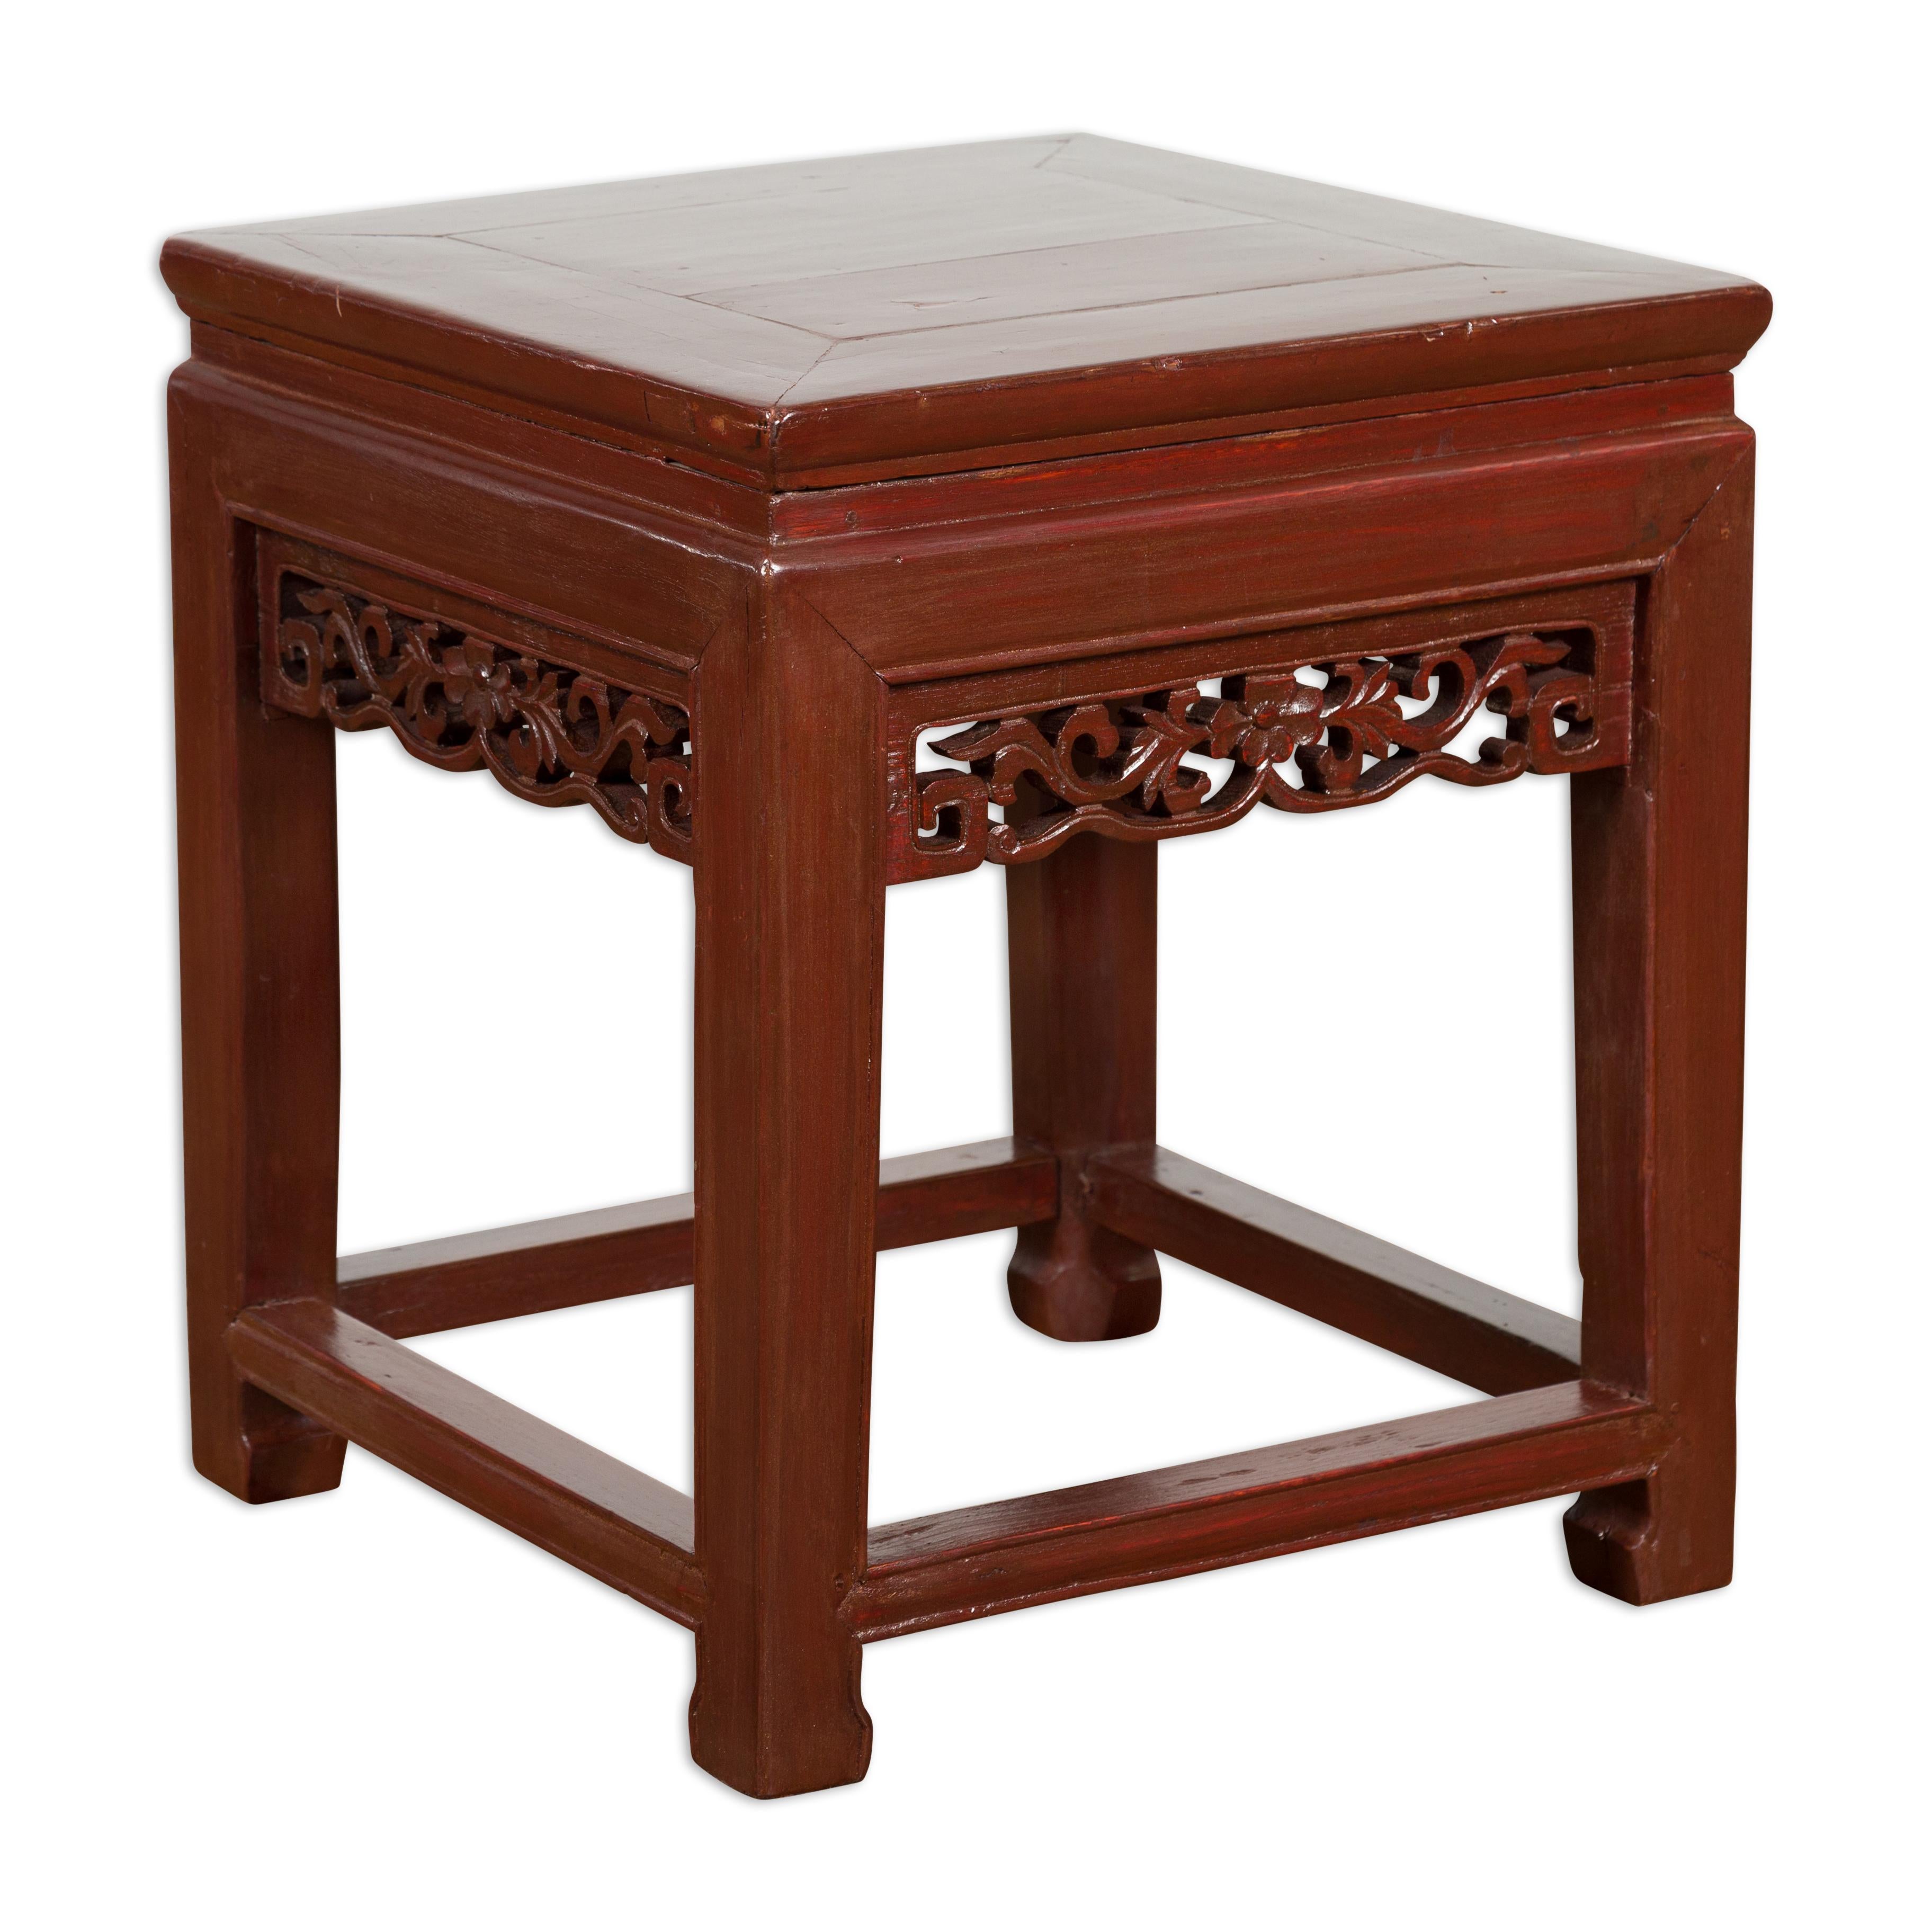 Chinese Late Qing Dynasty Period Red Lacquer Carved Side Table or Stool For Sale 13